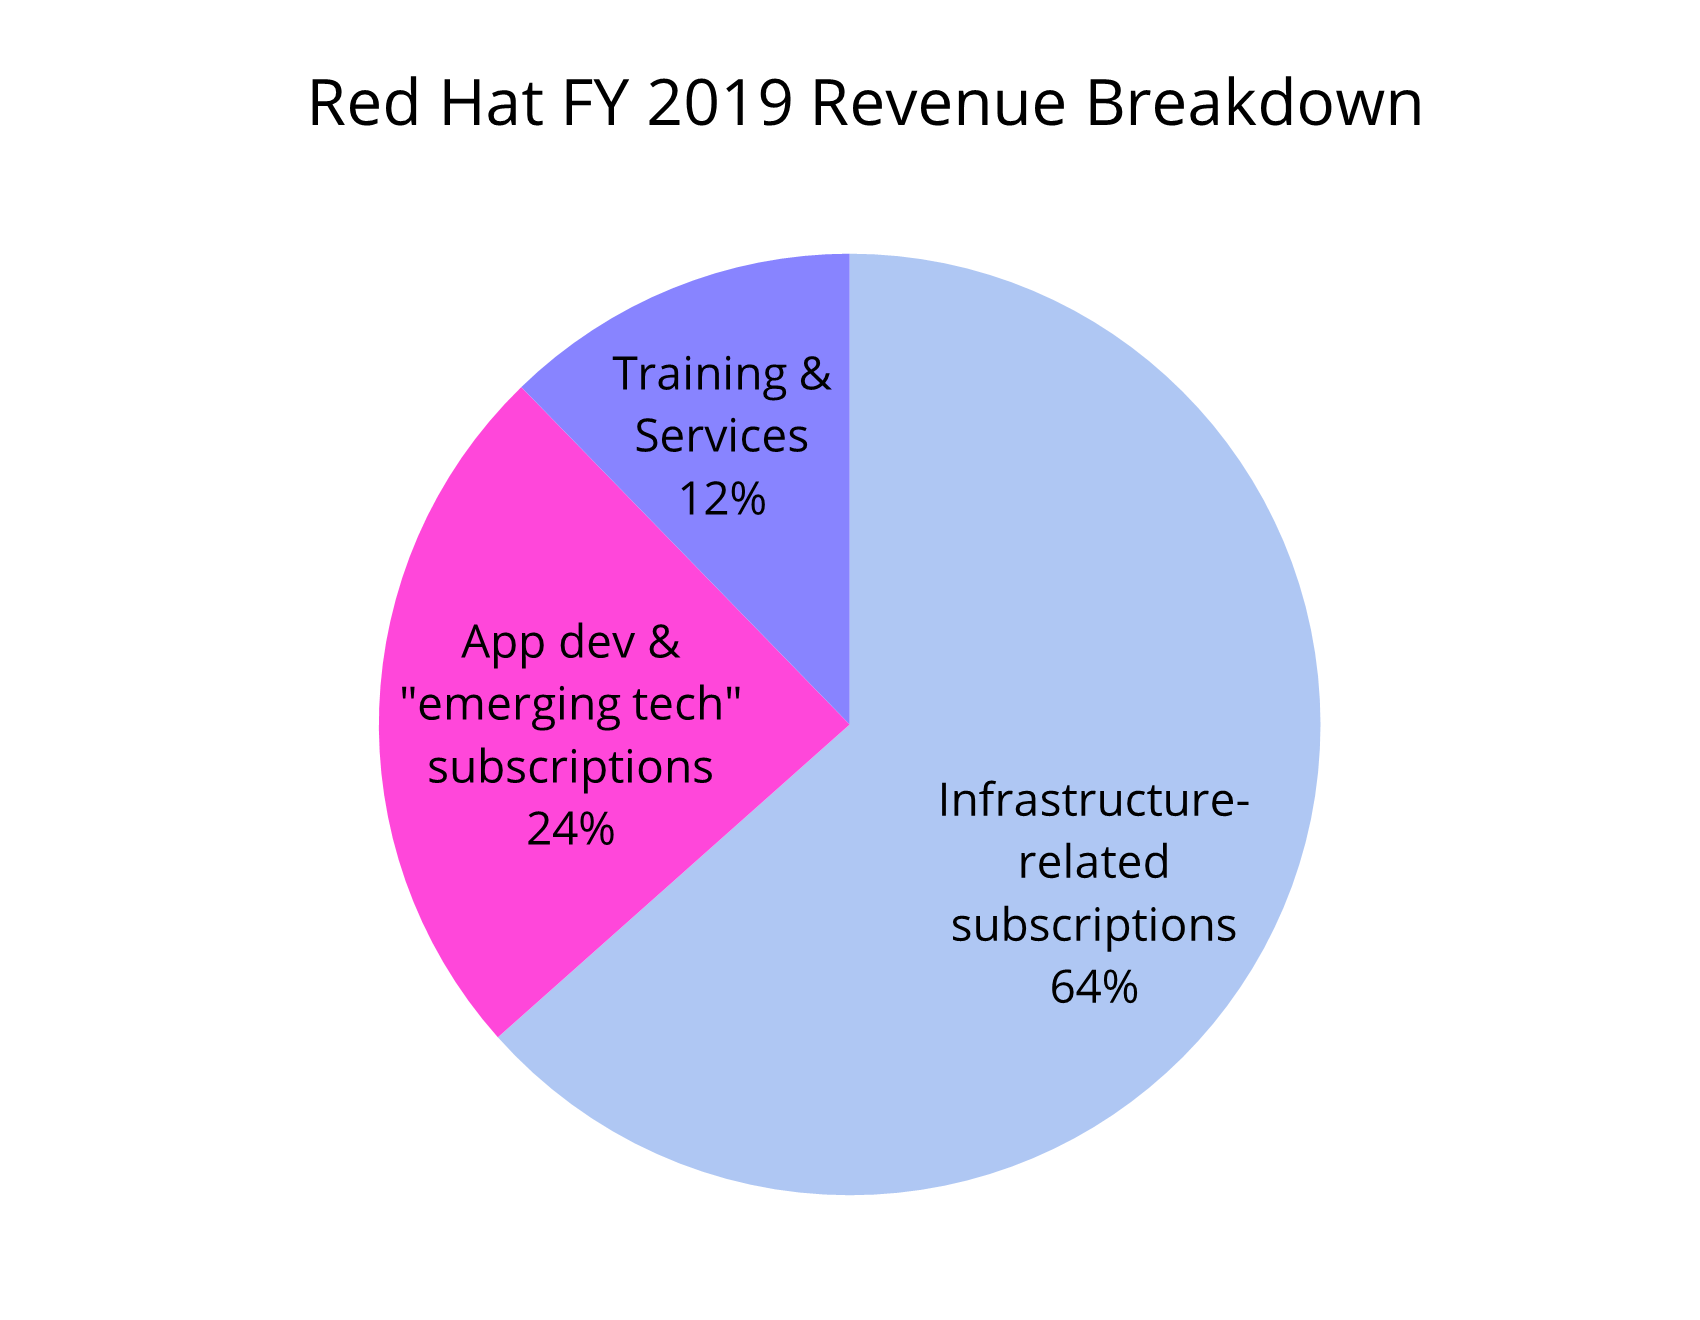 A pie chart showing Red Hat&rsquo;s Fiscal Year 2019 revenue breakdown. 64% for infrastructure-releated subscriptions, 24% for app development and &ldquo;emerging technology&rdquo; subscriptions, and 12% for training and services.